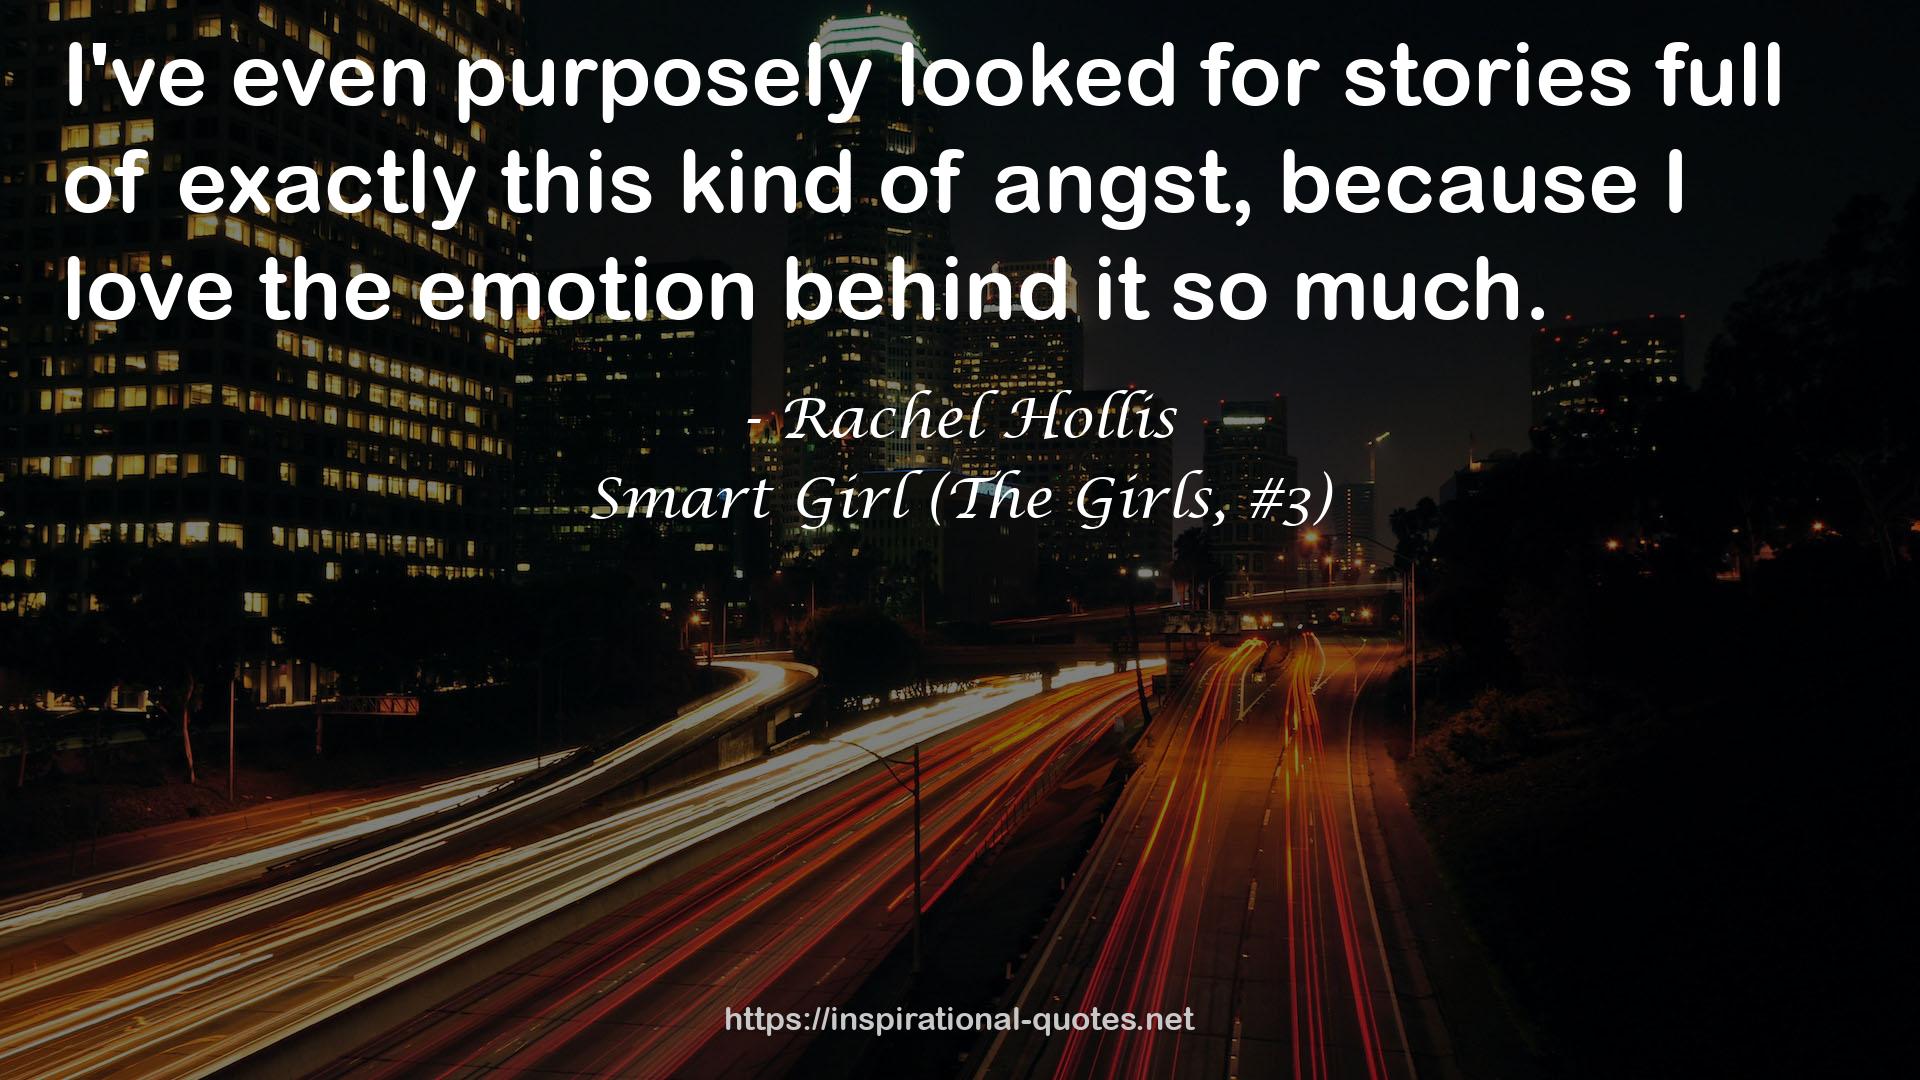 Smart Girl (The Girls, #3) QUOTES